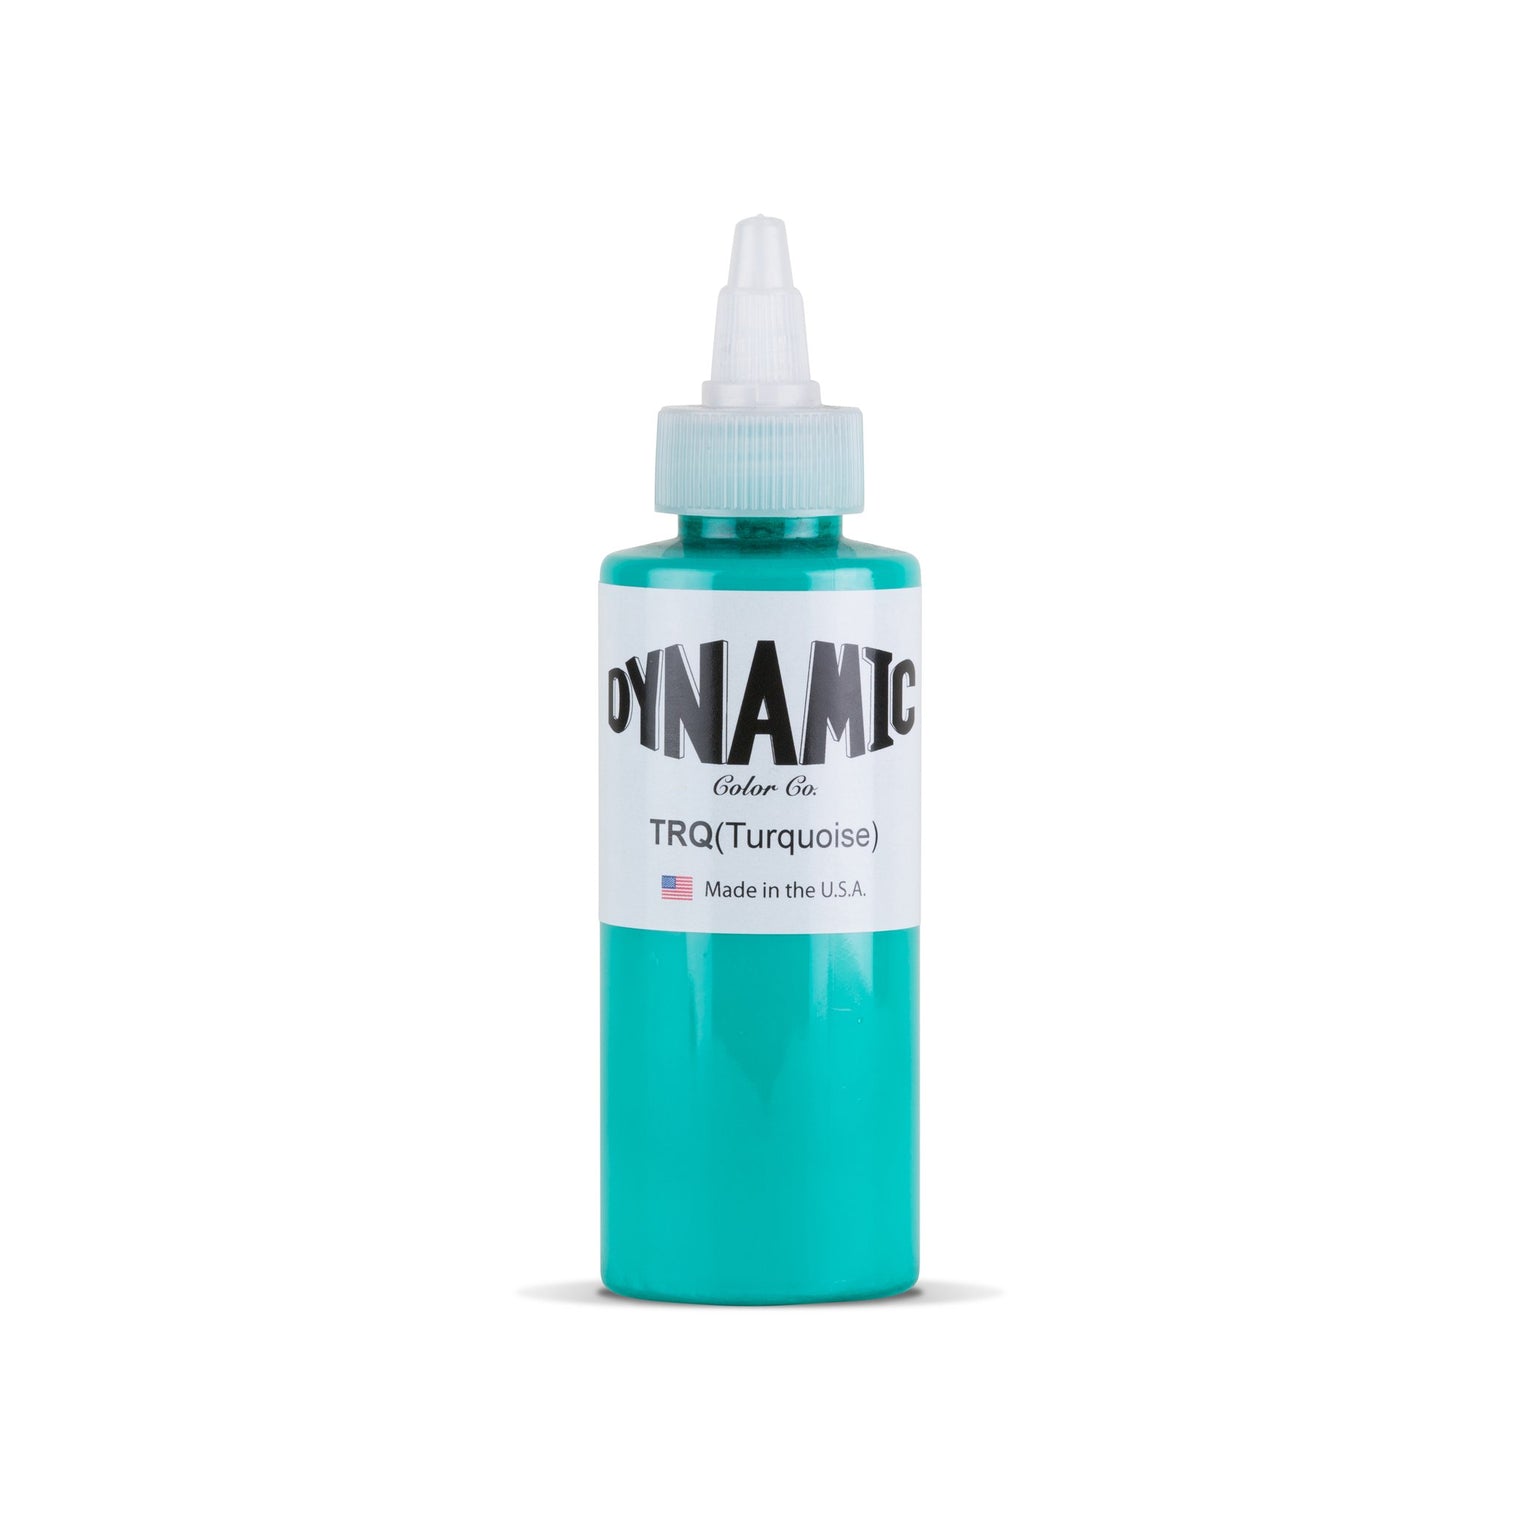 Dynamic Color Turquoise Tattoo Ink - 1oz